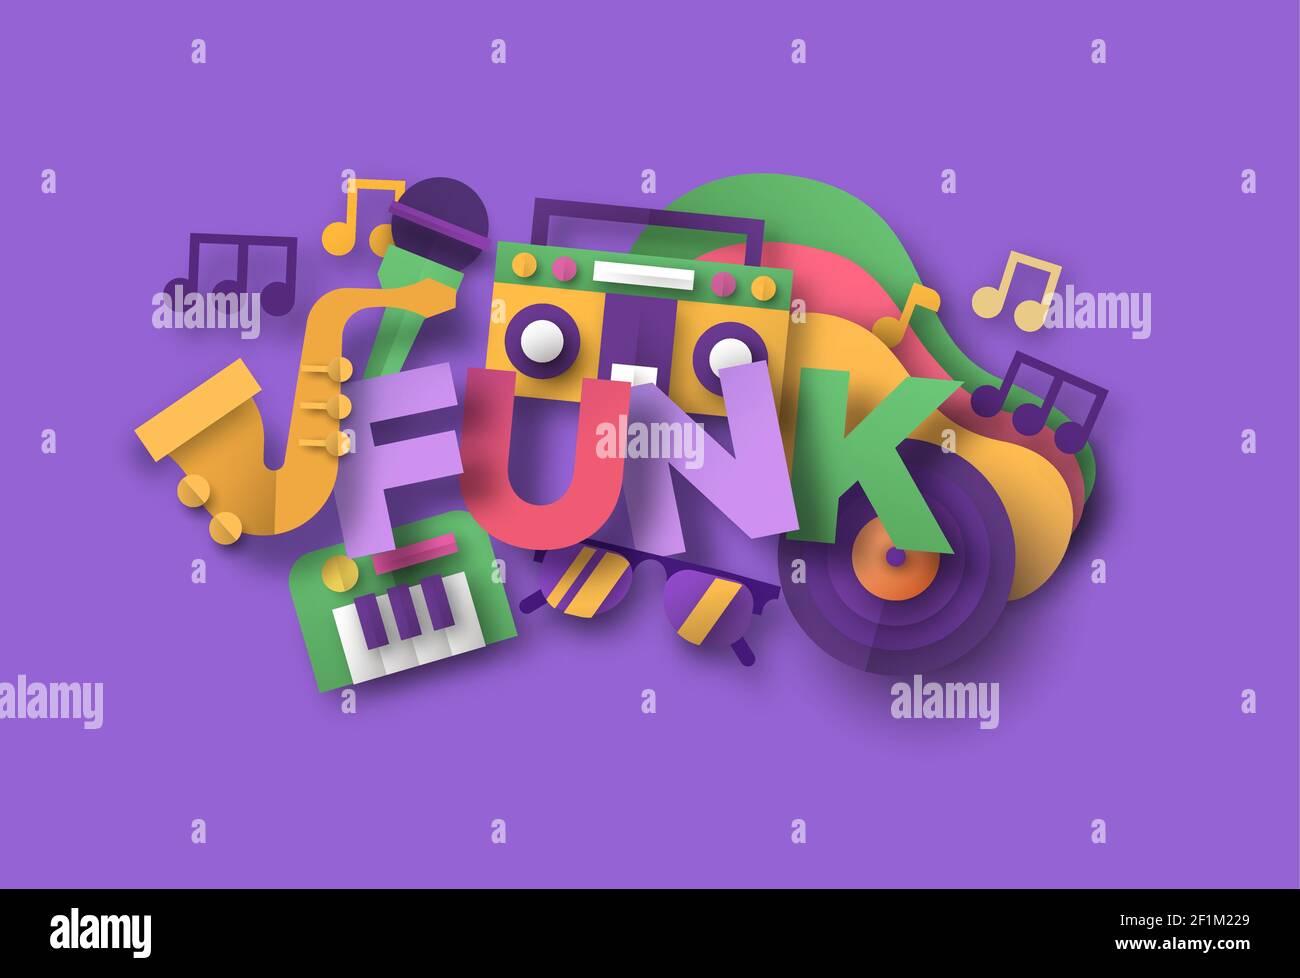 Funk music style illustration with 3d paper cut musical equipment icons. Groovy band, festival event or concert show concept. Includes microphone, sax Stock Vector